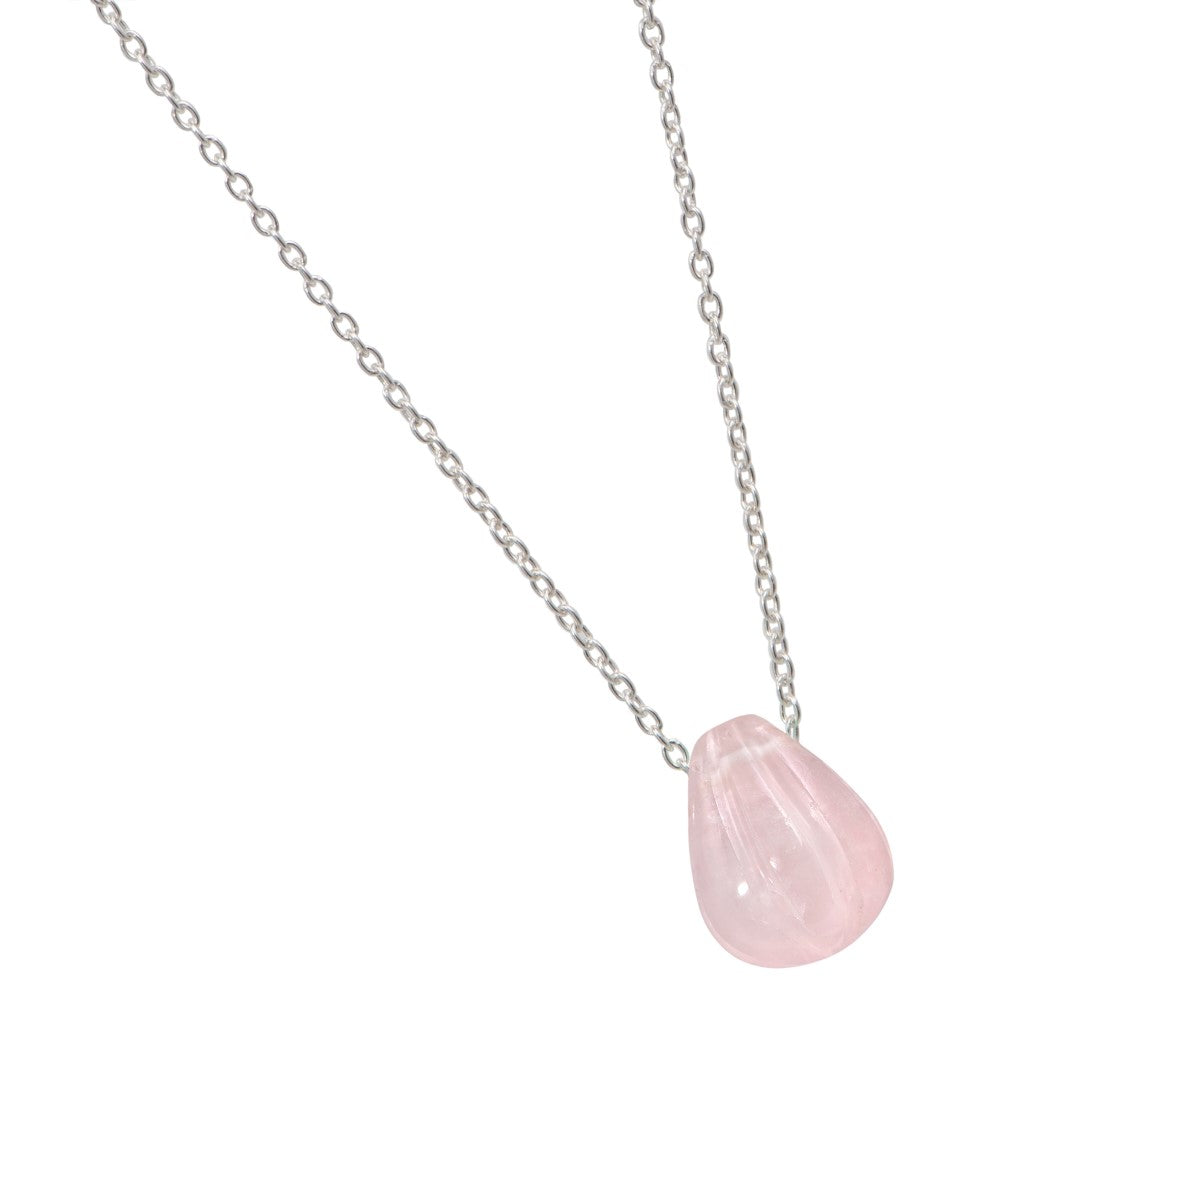 Sterling Silver Necklace with a Carved Rose Quartz Gemstone